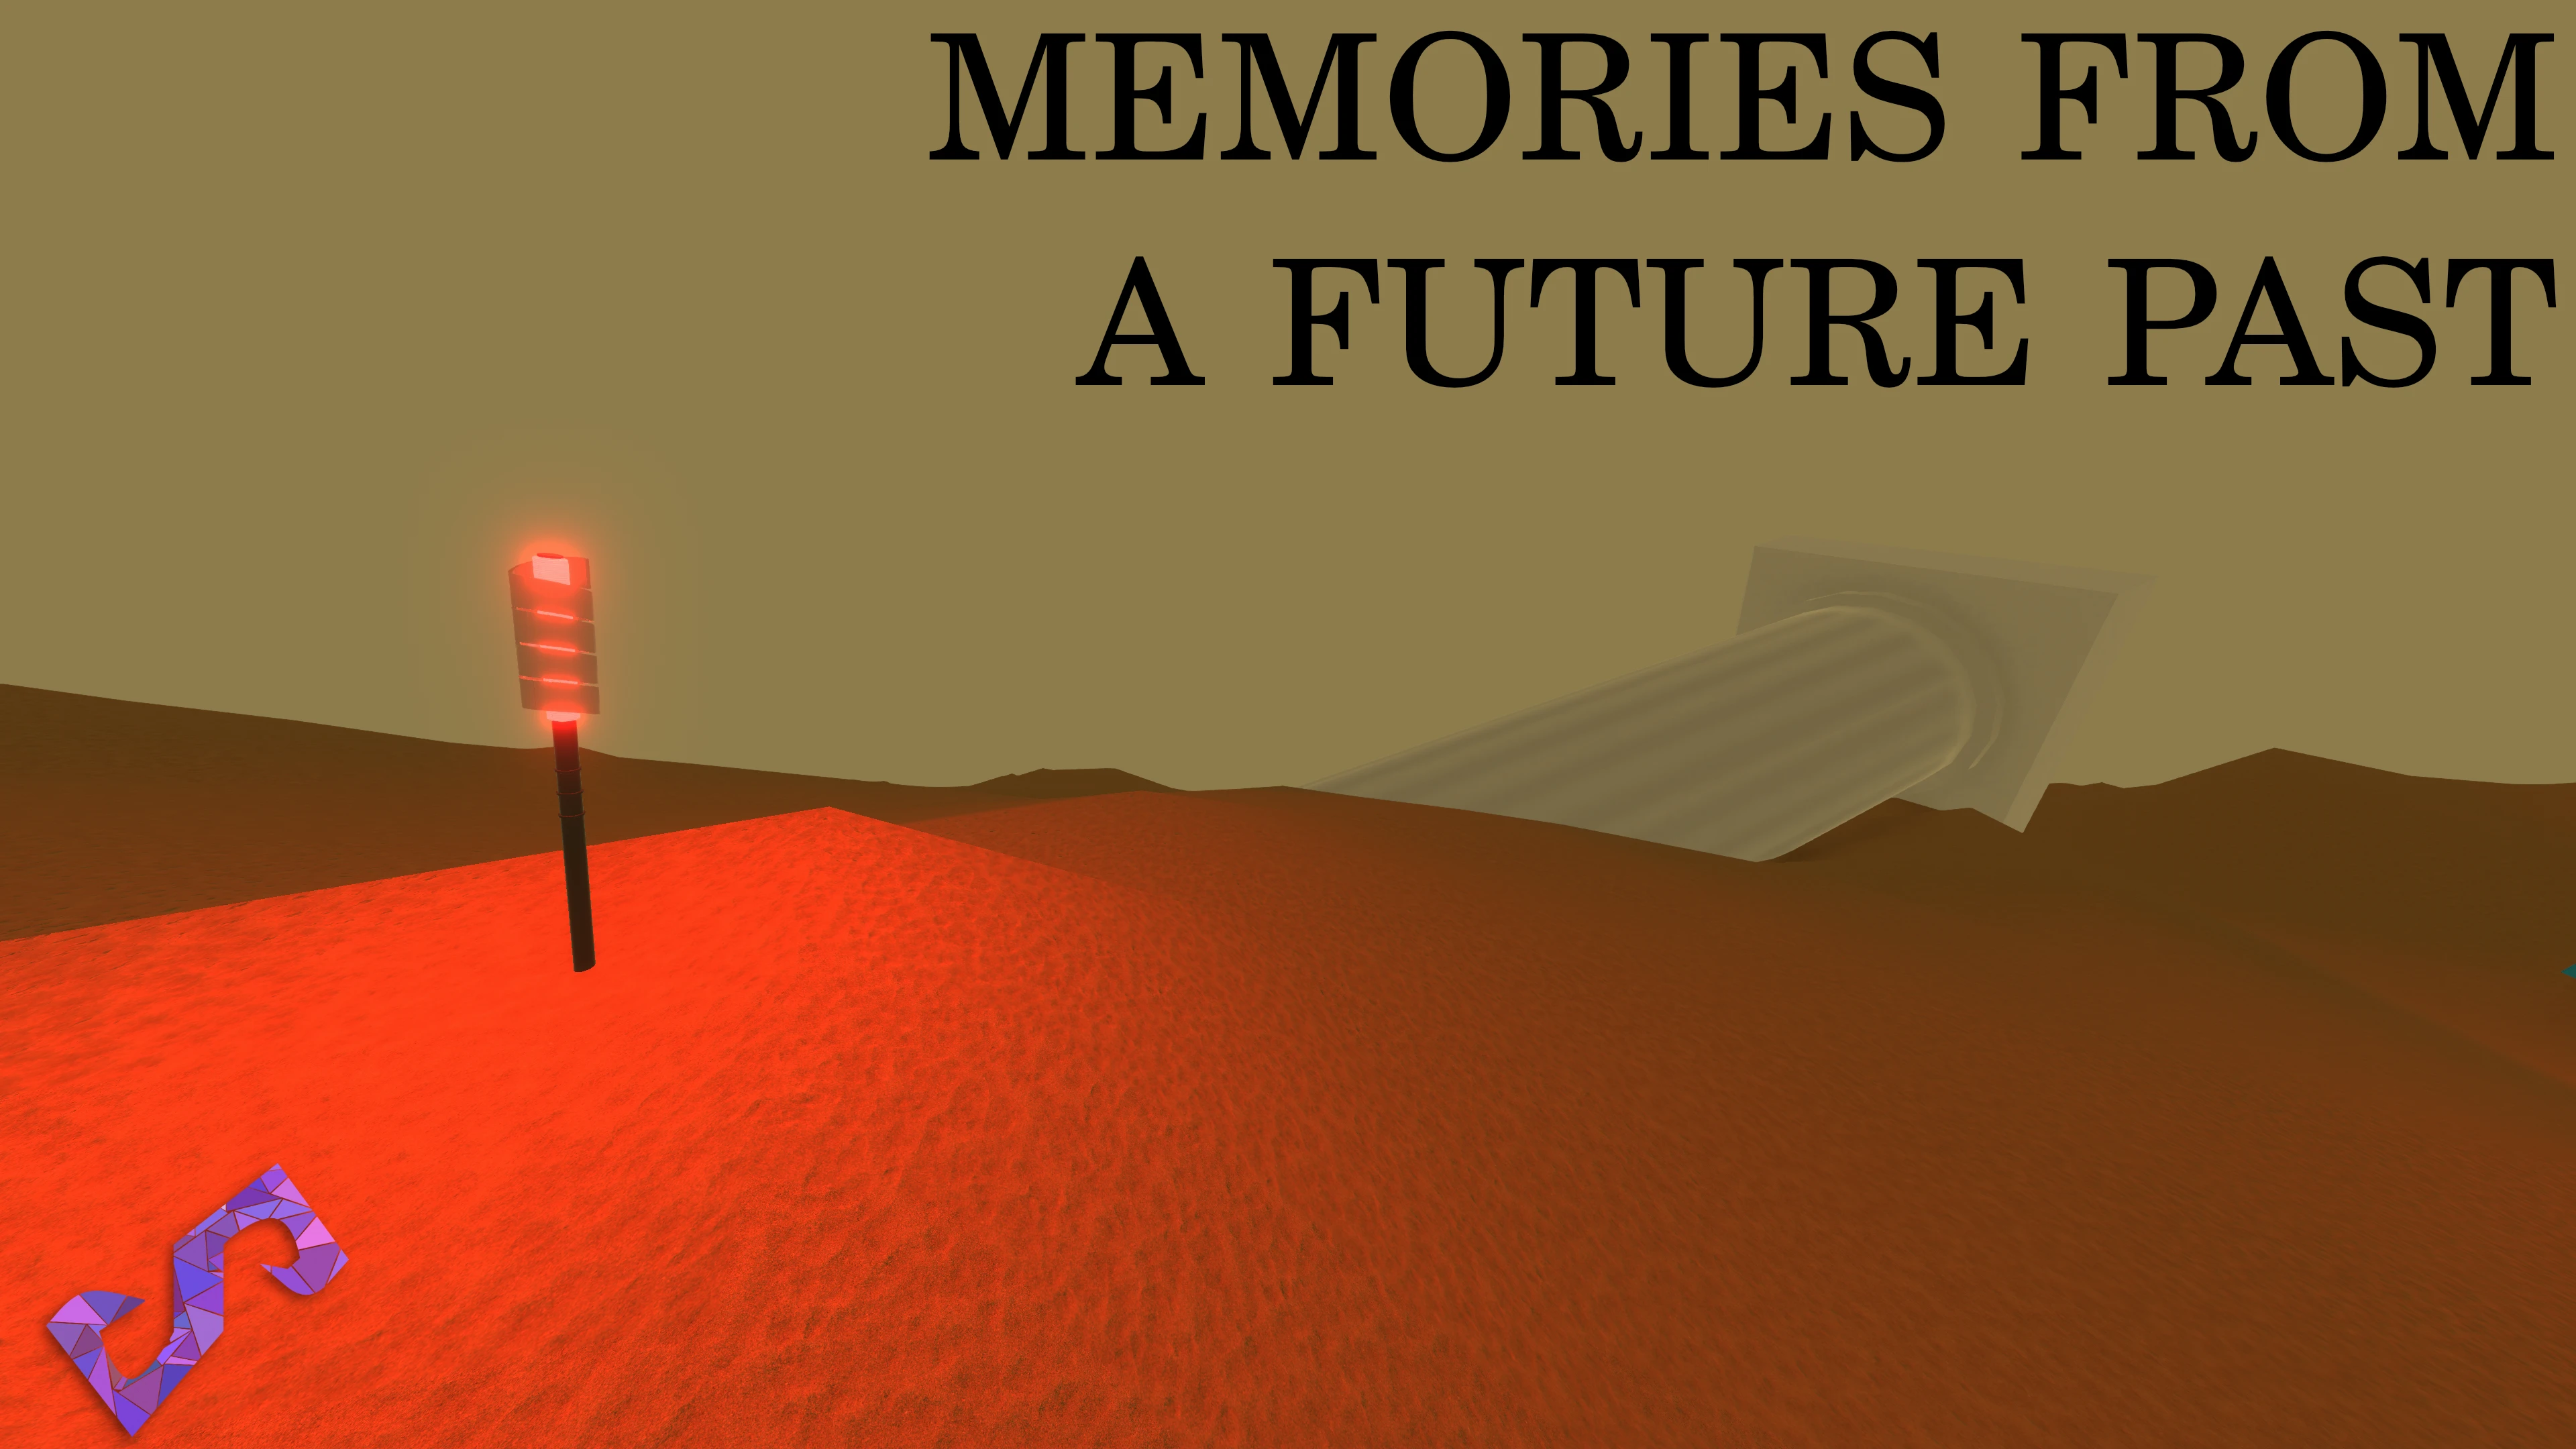 Desert with a lamp and antic column fallen with the text Memories From a Future Past.